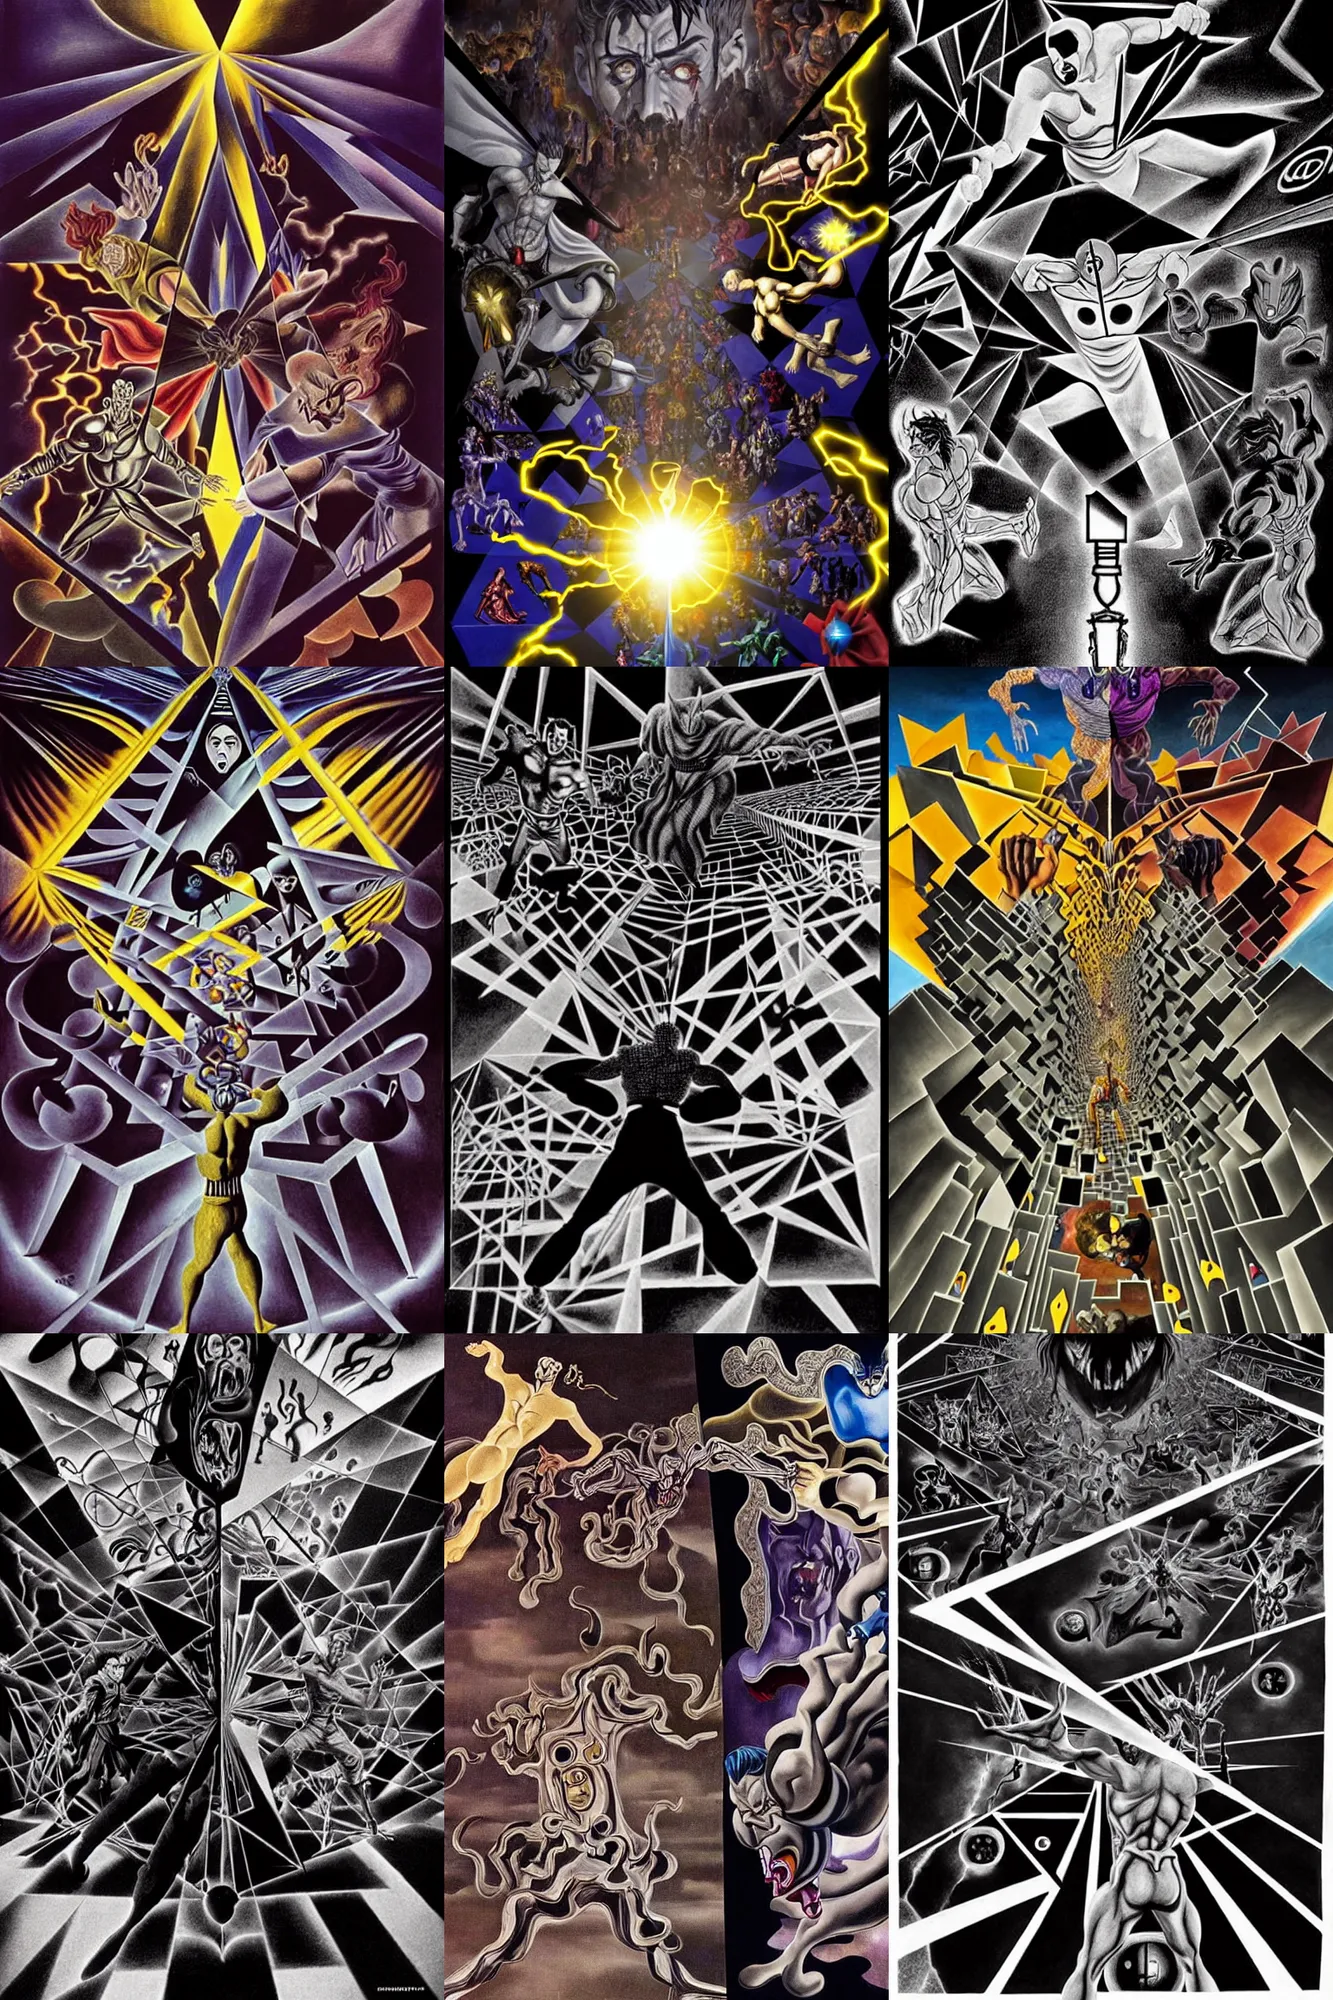 Prompt: the final fight between a crazed shadowy! figure against the king of light!!!! in the middle of the multiverse in the new movie scene!! with art direction by berinski!!, salvador dali!! and mc escher!! tesselation!